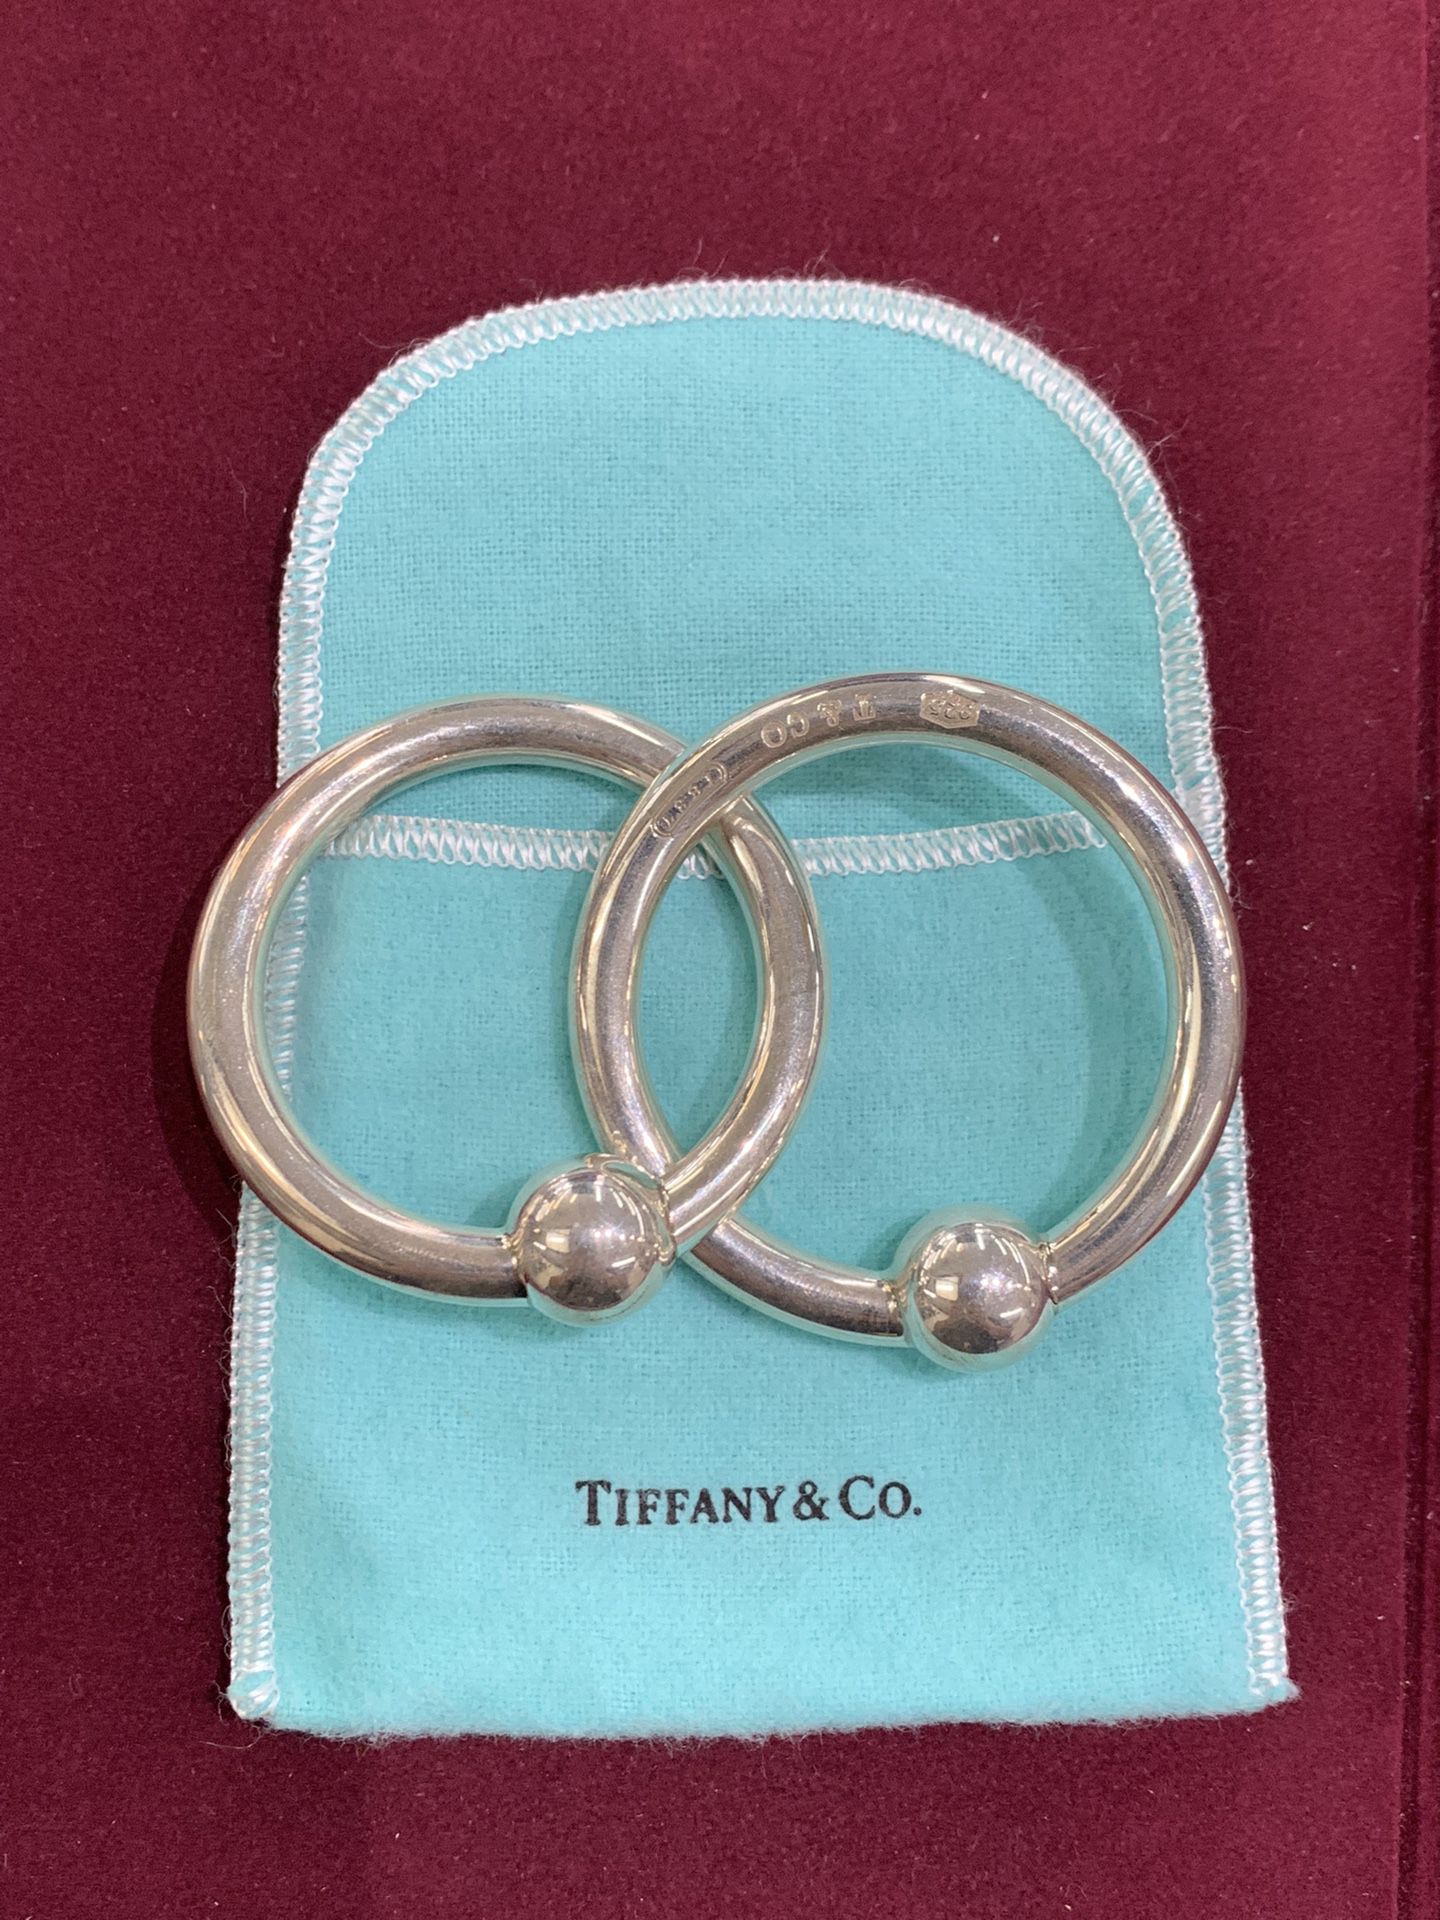 Tiffany & Co. Sterling Silver Baby Rattle Toy 